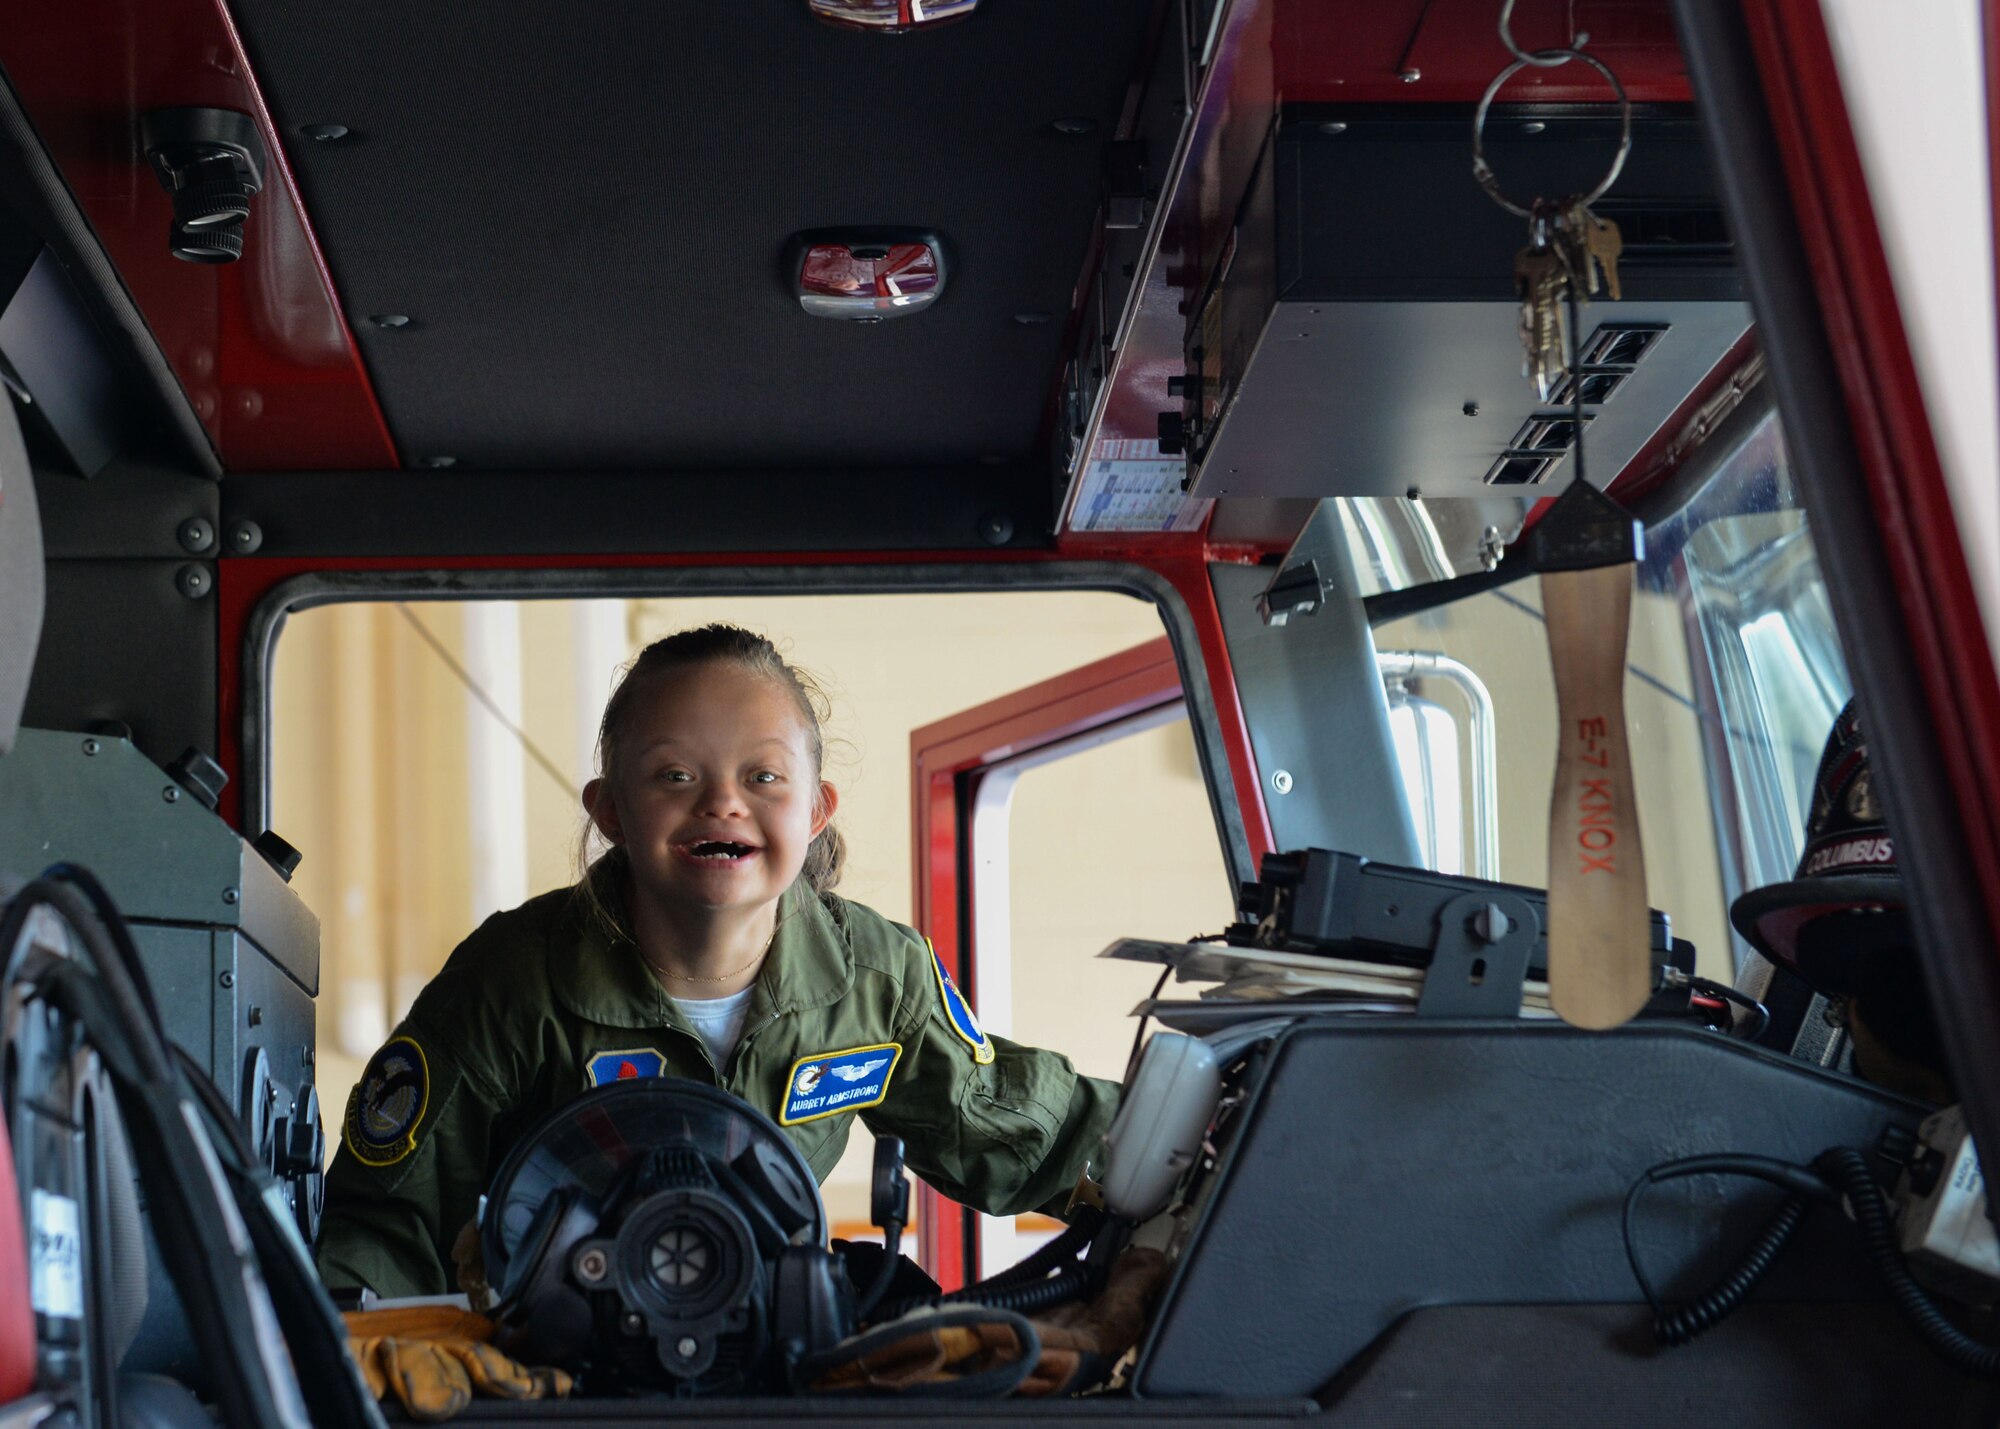 Aubrey Armstrong, Pilot for a Day, smiles as she enters a fire truck at the Columbus Air Force Base Fire Department June 25, 2019, on Columbus AFB, Miss. Aubrey met the firefighters from the 14th CES and sprayed the hose from the firetruck. (U.S. Air Force photo by Airman Davis Donaldson)